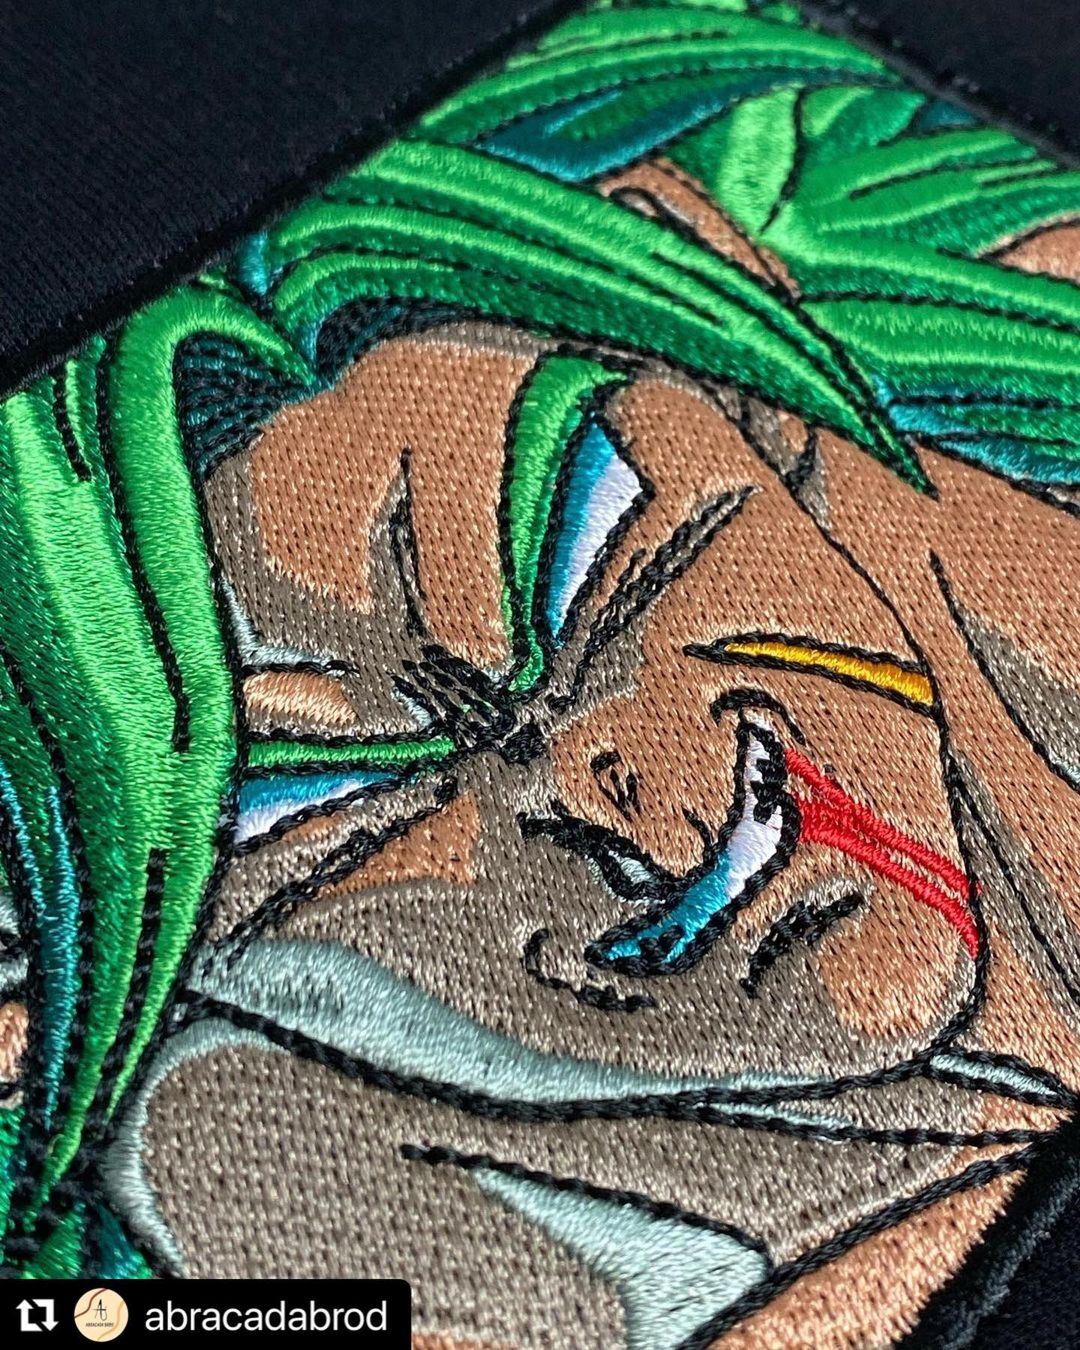 Dragon Ball Z Anime Embroidery Design, Anime Embroidery File - Inspire  Uplift